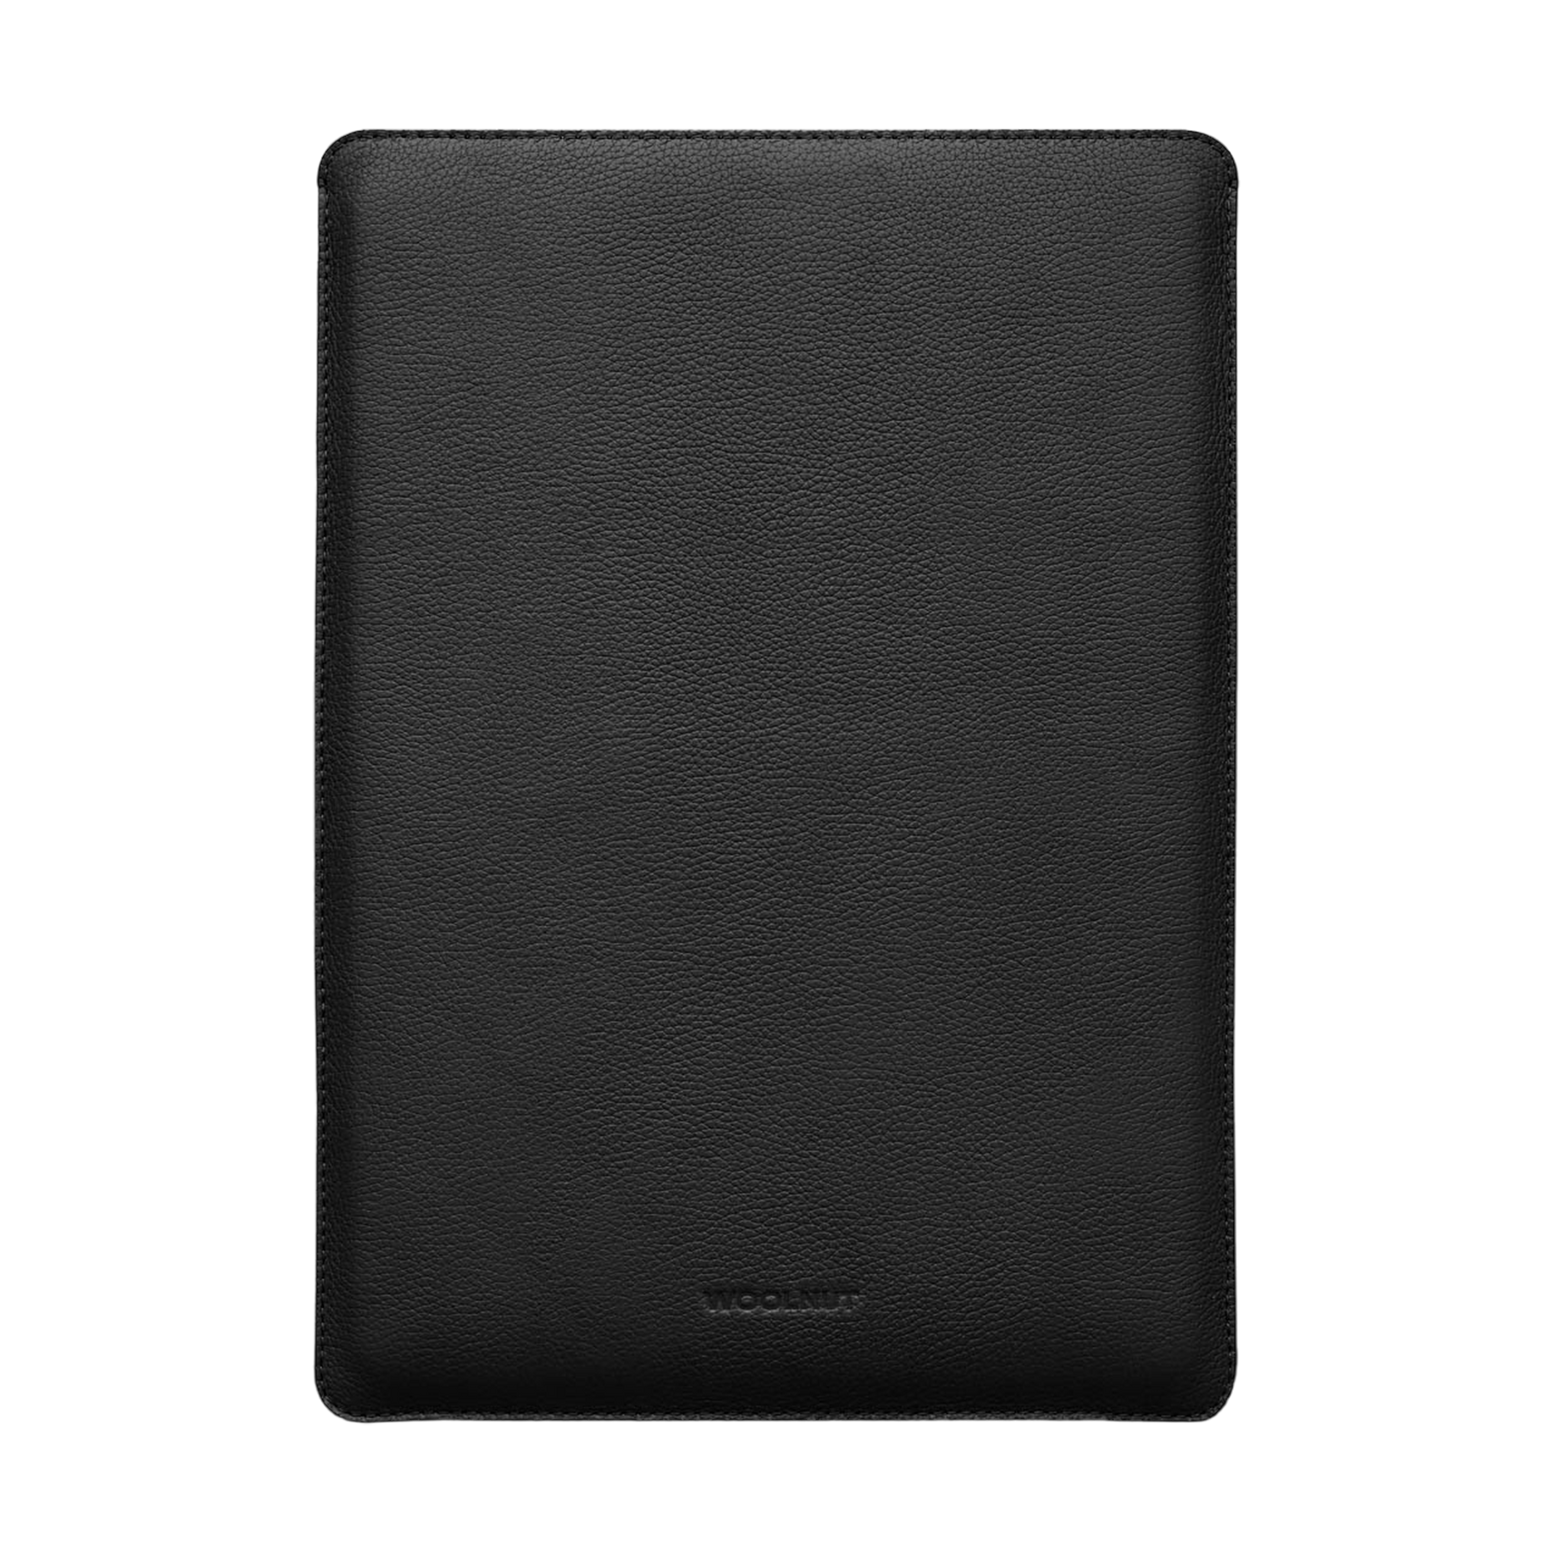 WOOLNUT Leather Sleeve for 15-inch MacBook Air - Black